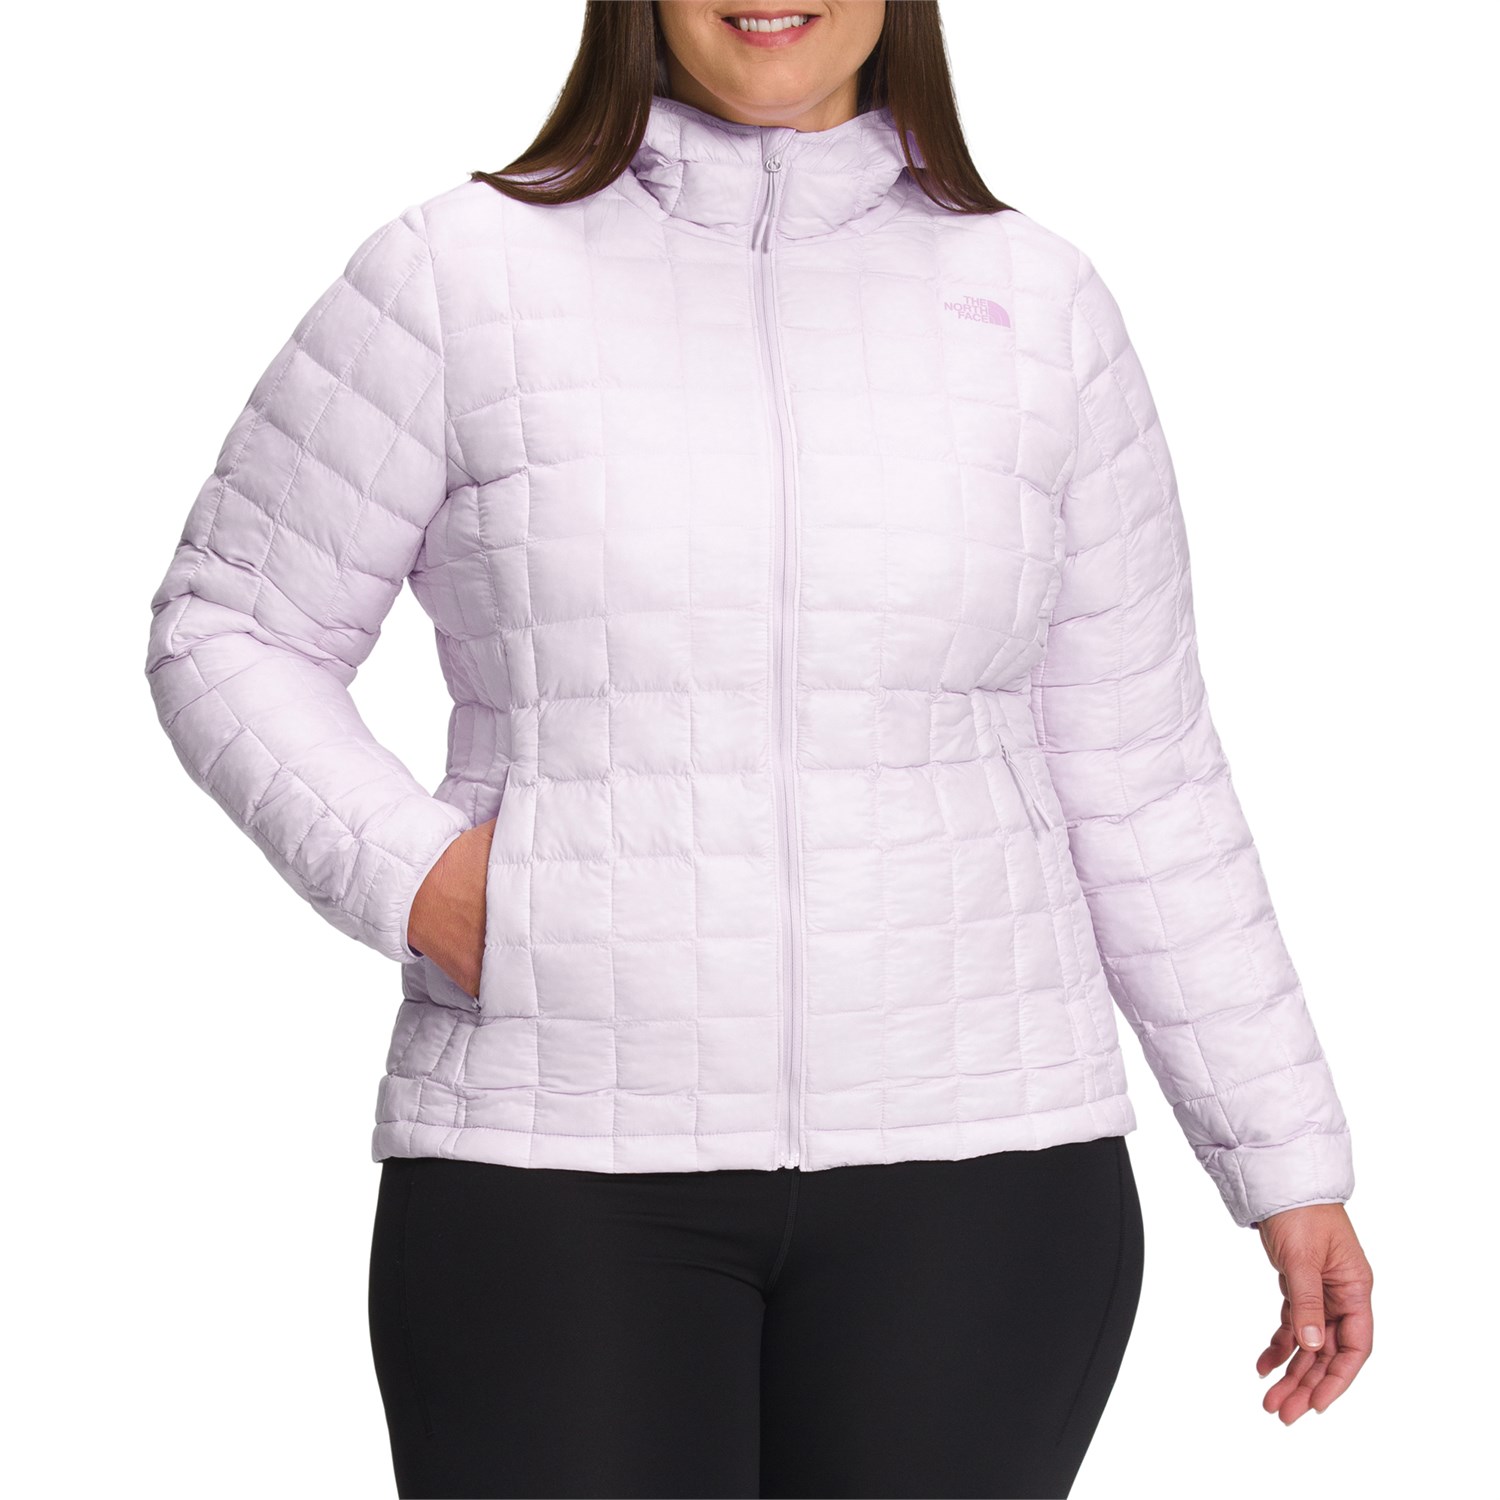 Худи The North Face ThermoBall Eco 2.0 Plus, цвет Lavender Fog худи the north face thermoball eco 2 0 plus цвет lavender fog